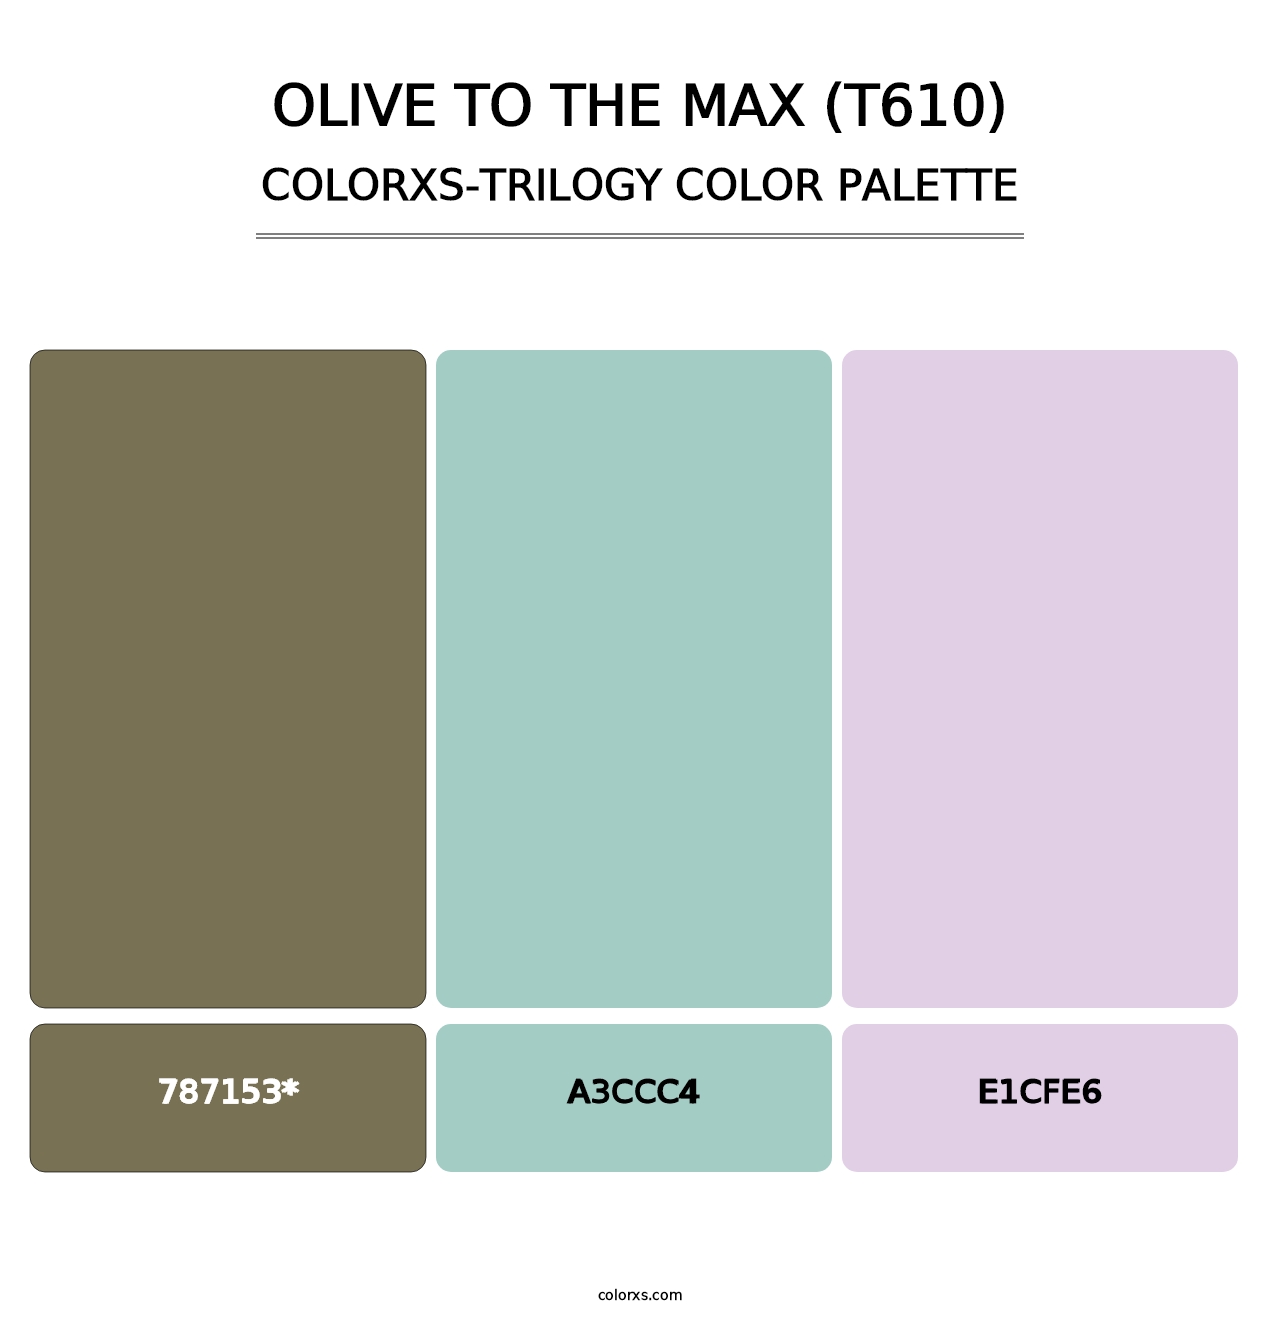 Olive to the Max (T610) - Colorxs Trilogy Palette